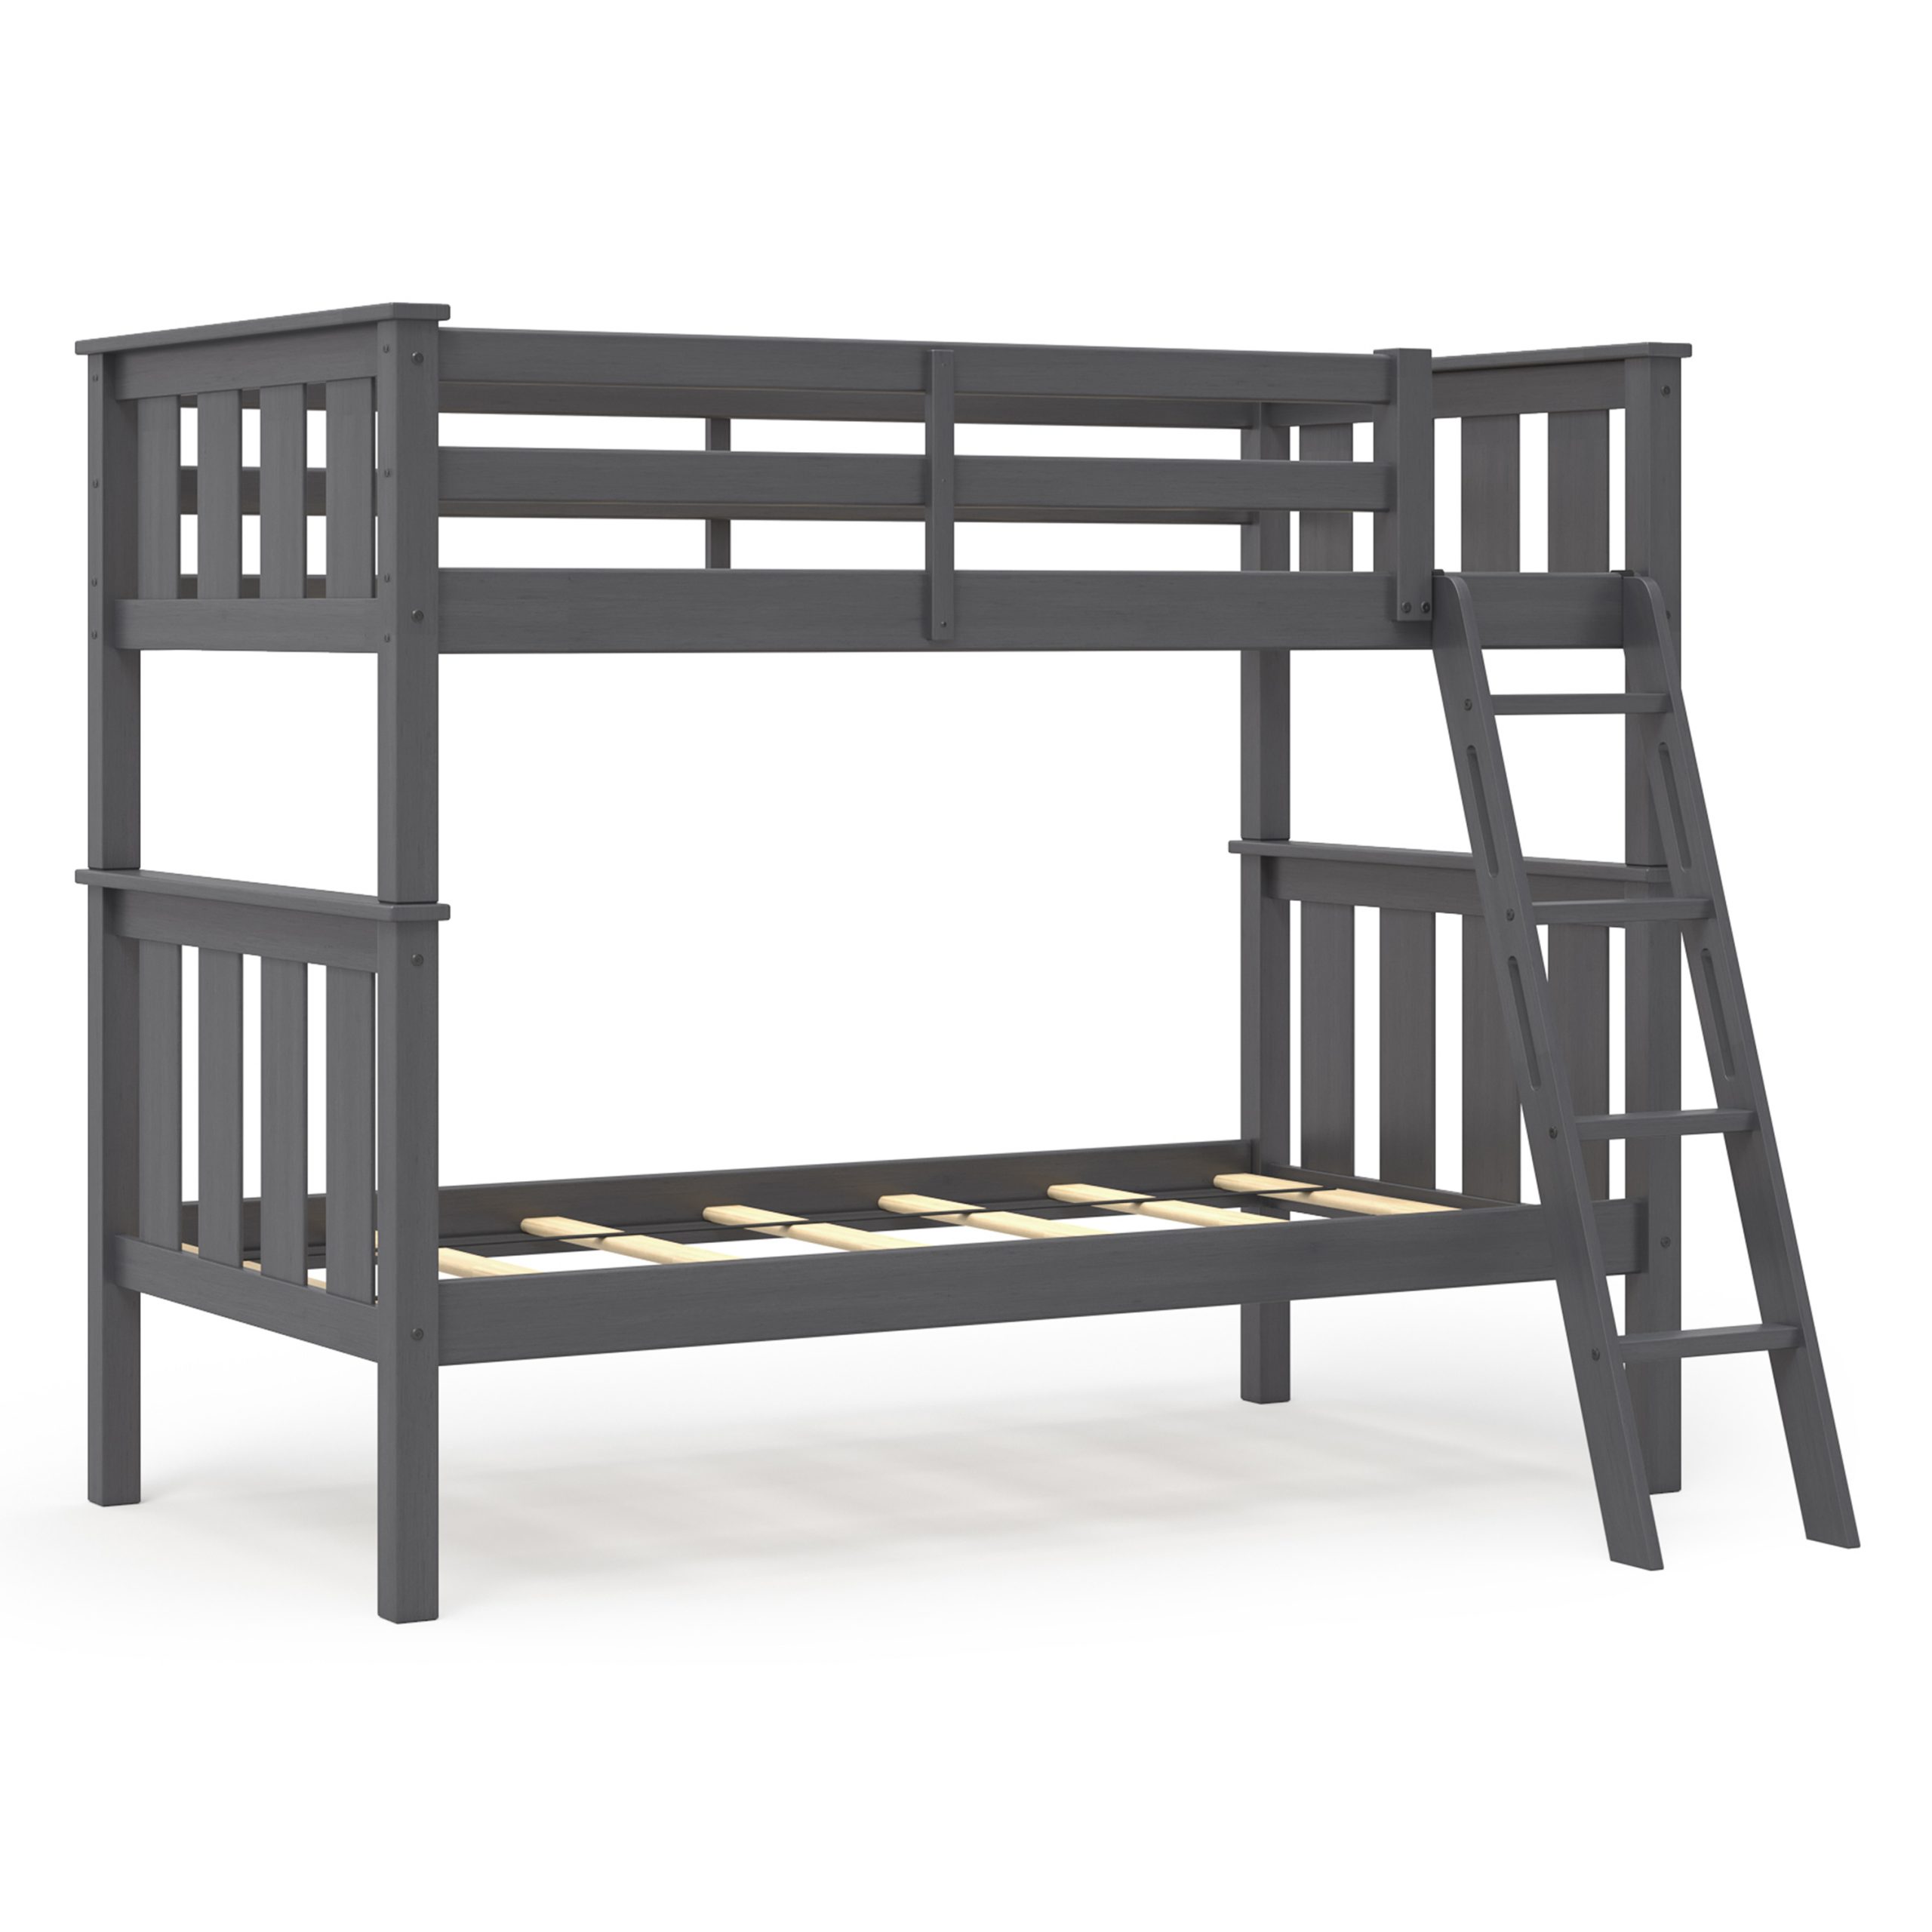 Kane Twin Bunk Bed, Whalen Bunk Bed Assembly Instructions